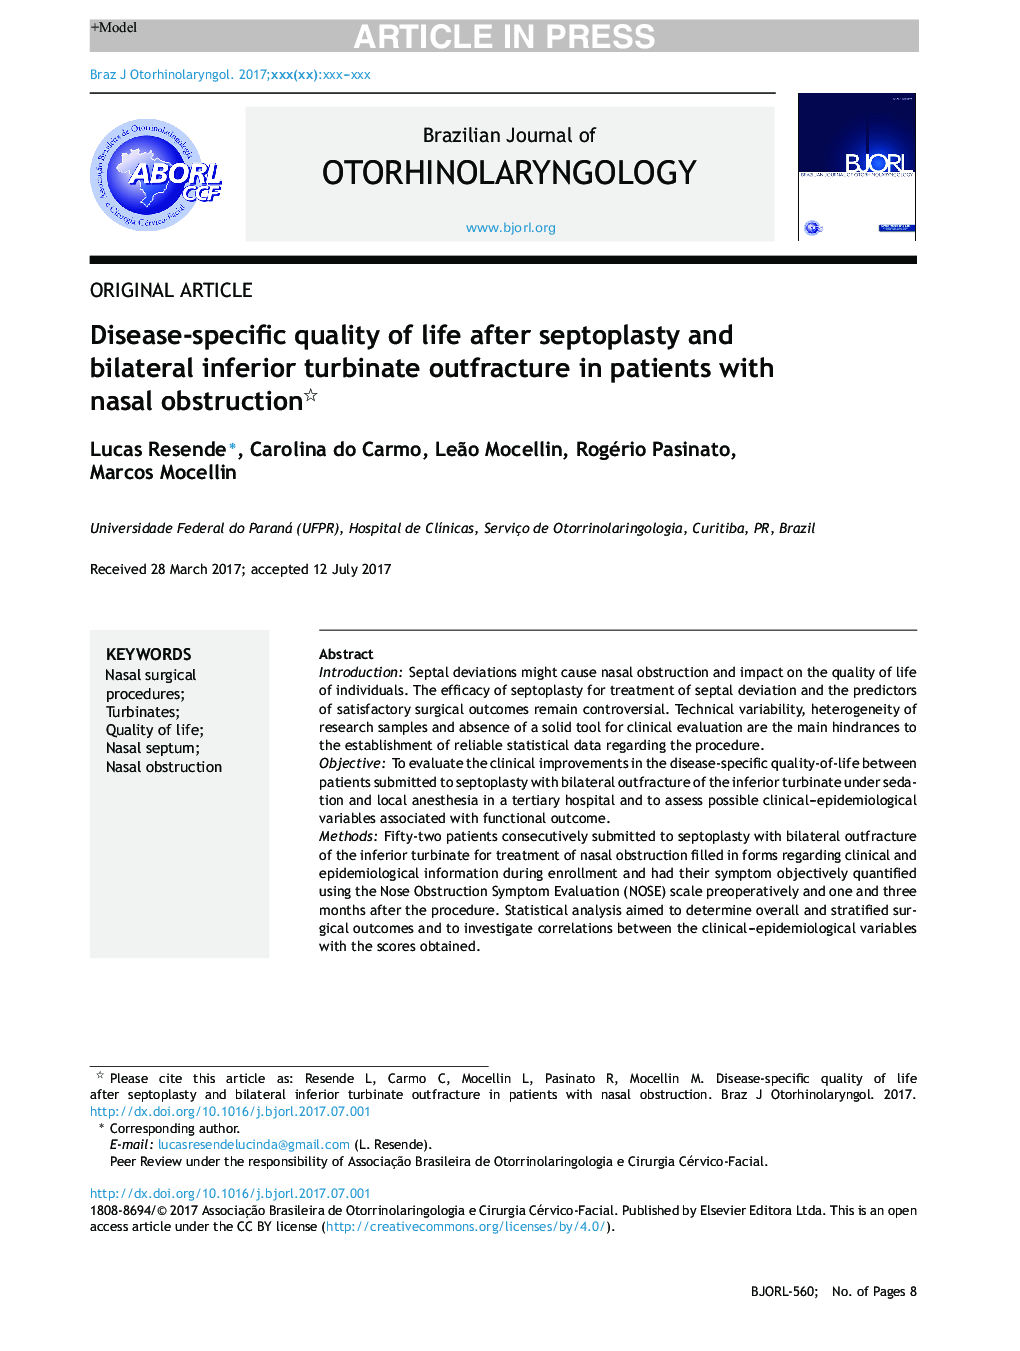 Disease-specific quality of life after septoplasty and bilateral inferior turbinate outfracture in patients with nasal obstruction